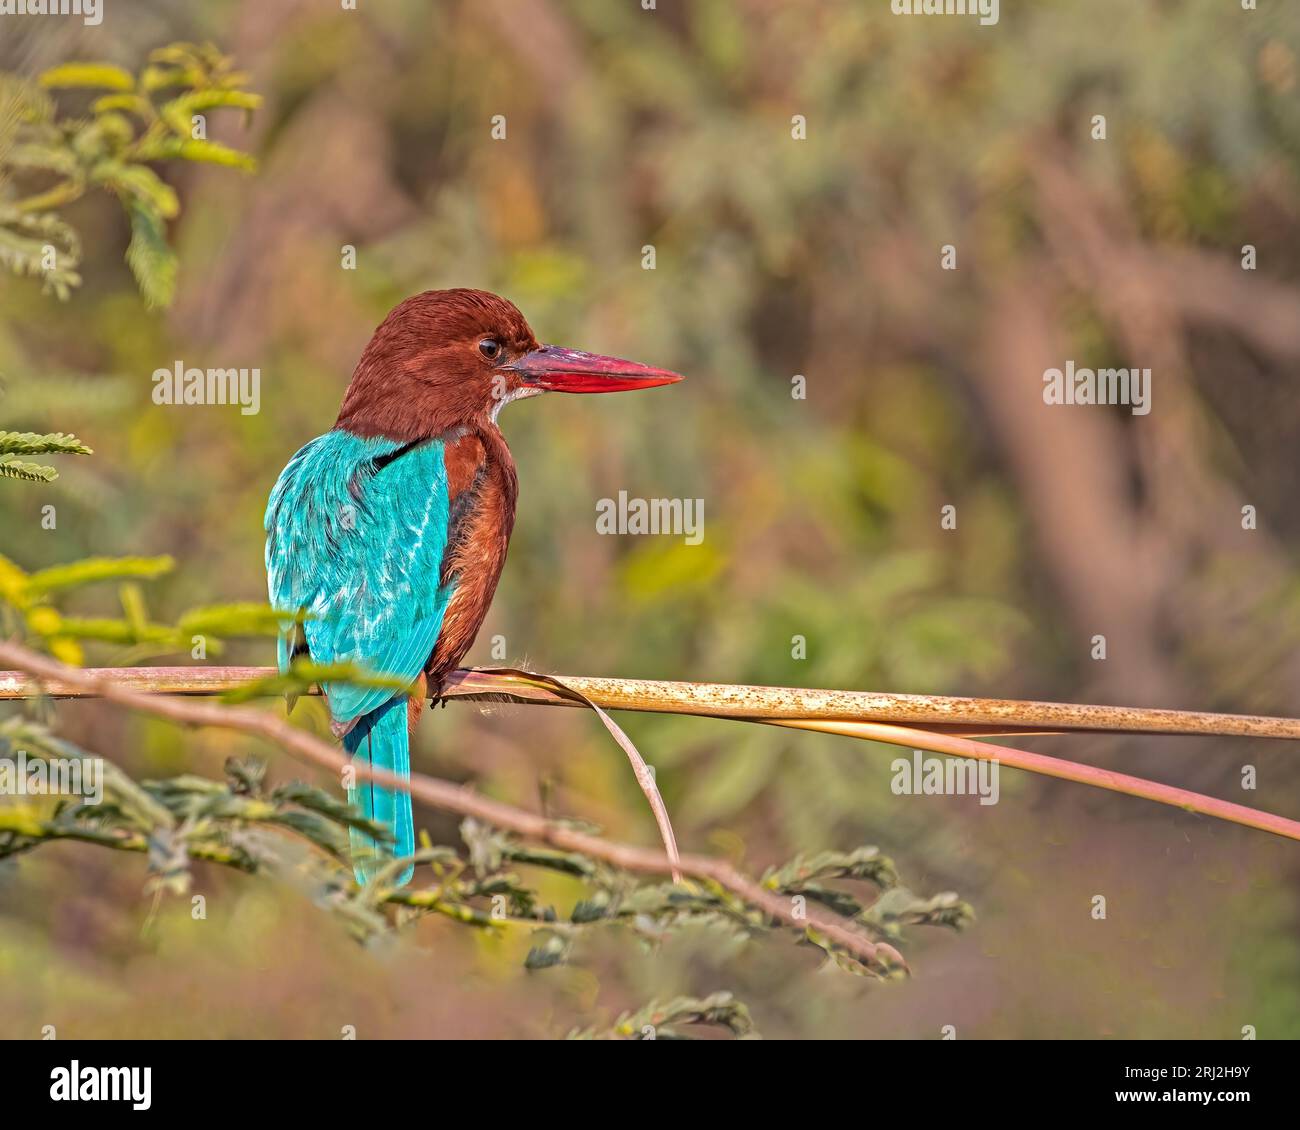 A White throated kingfisher perching on a tree Stock Photo